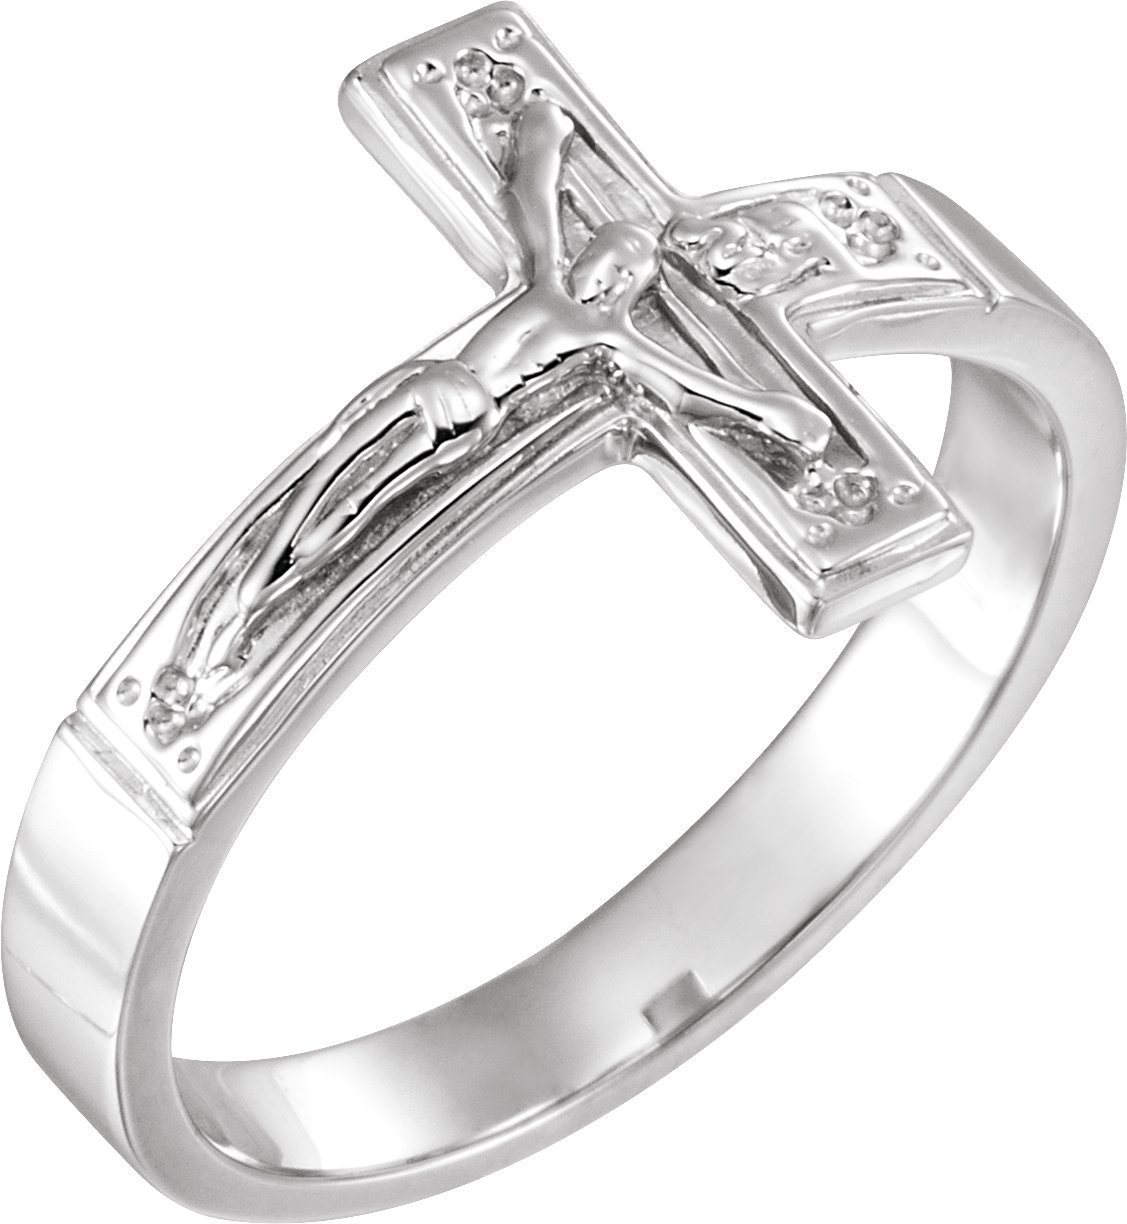 Sterling Silver 12 mm Crucifix Chastity Ring Size 4